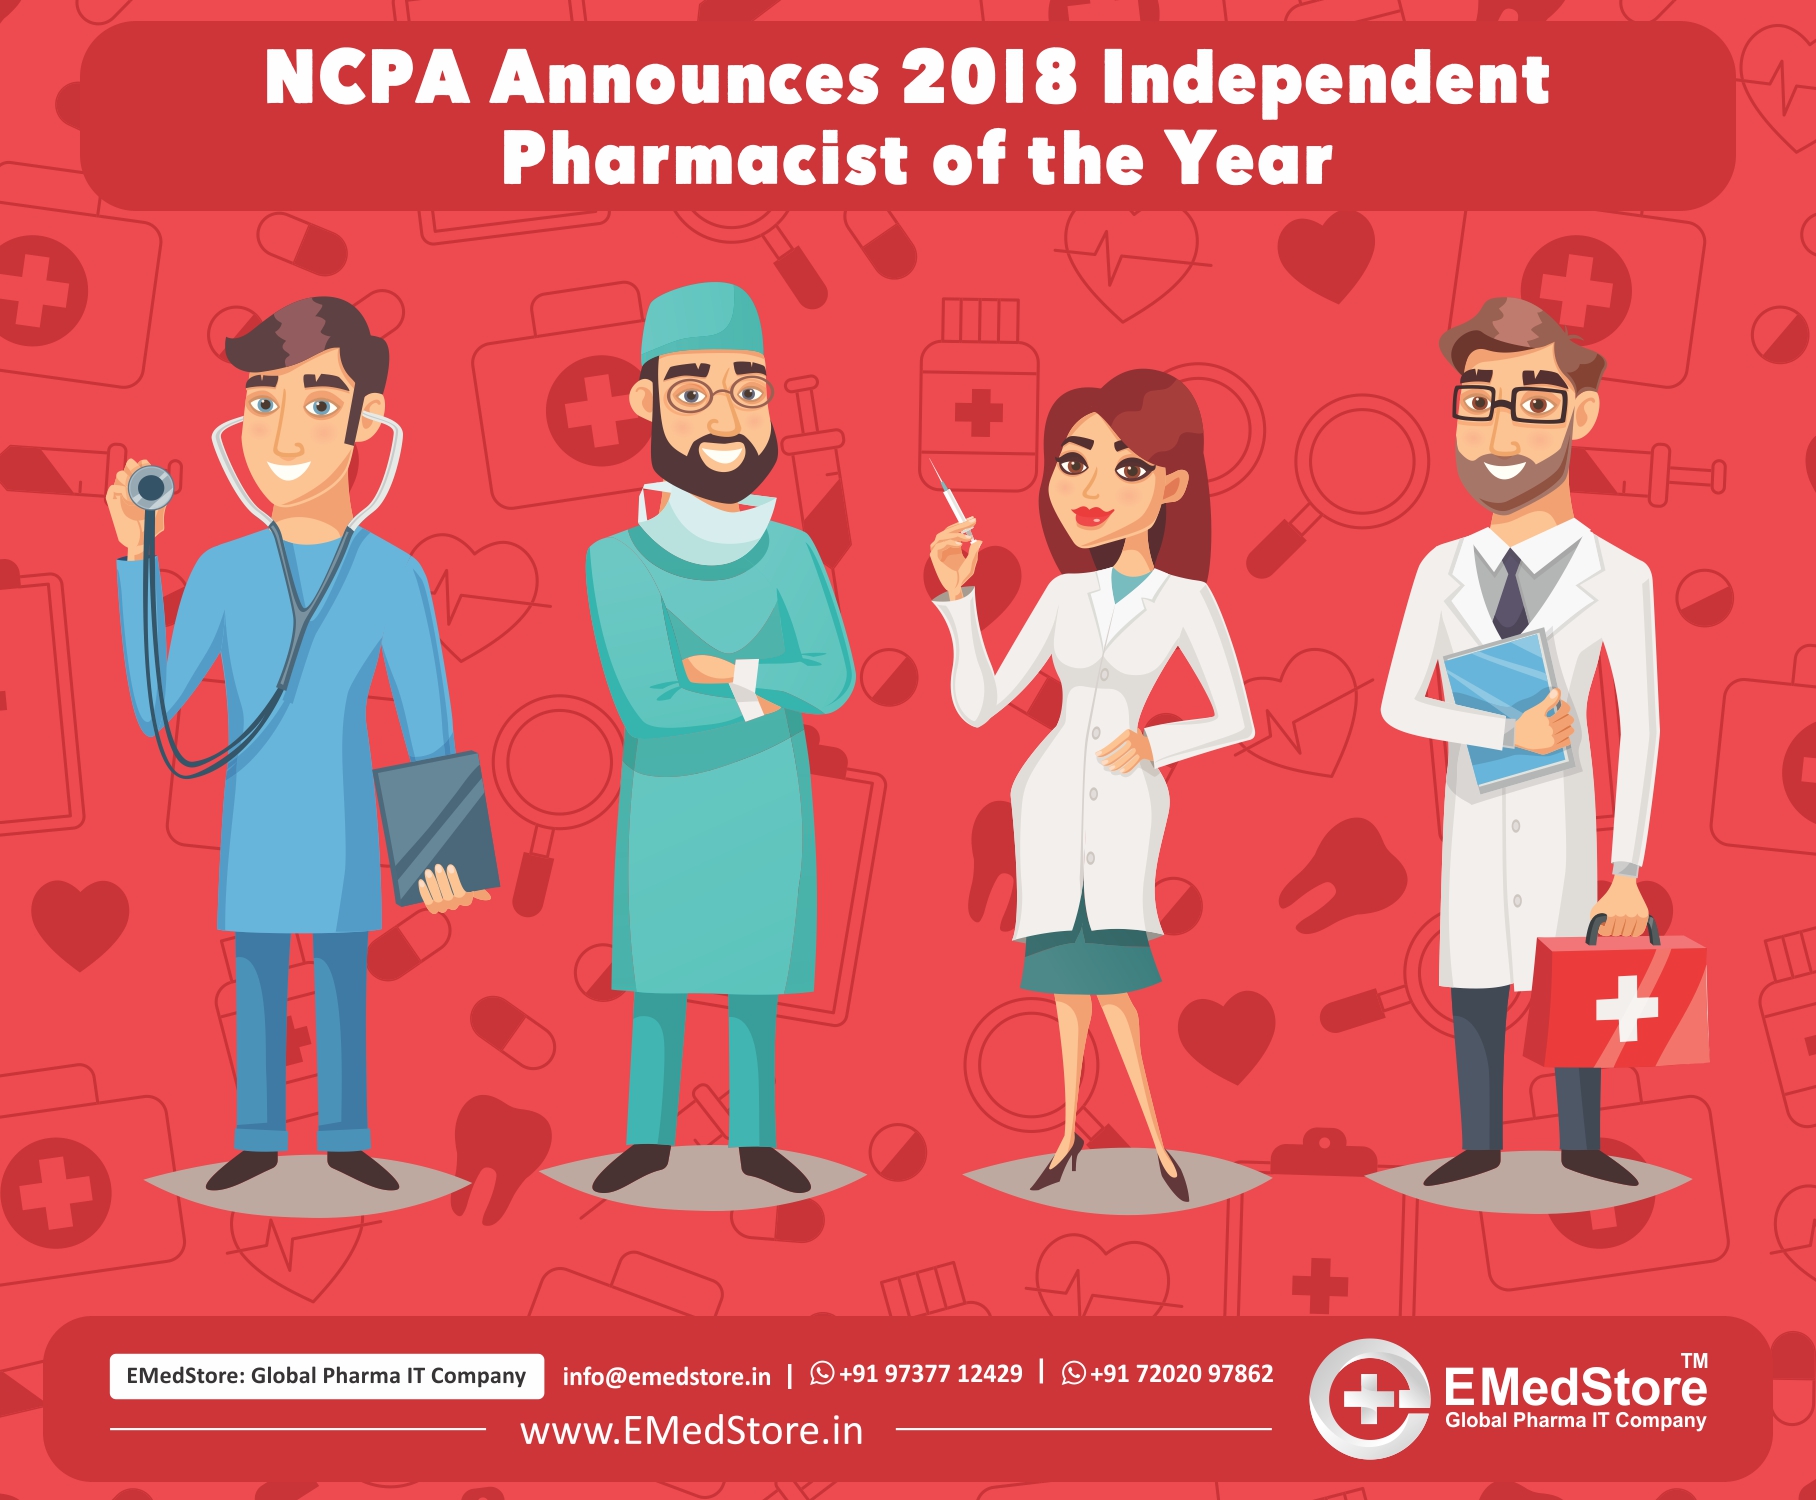 NCPA Announces 2018 Independent Pharmacist of the Year